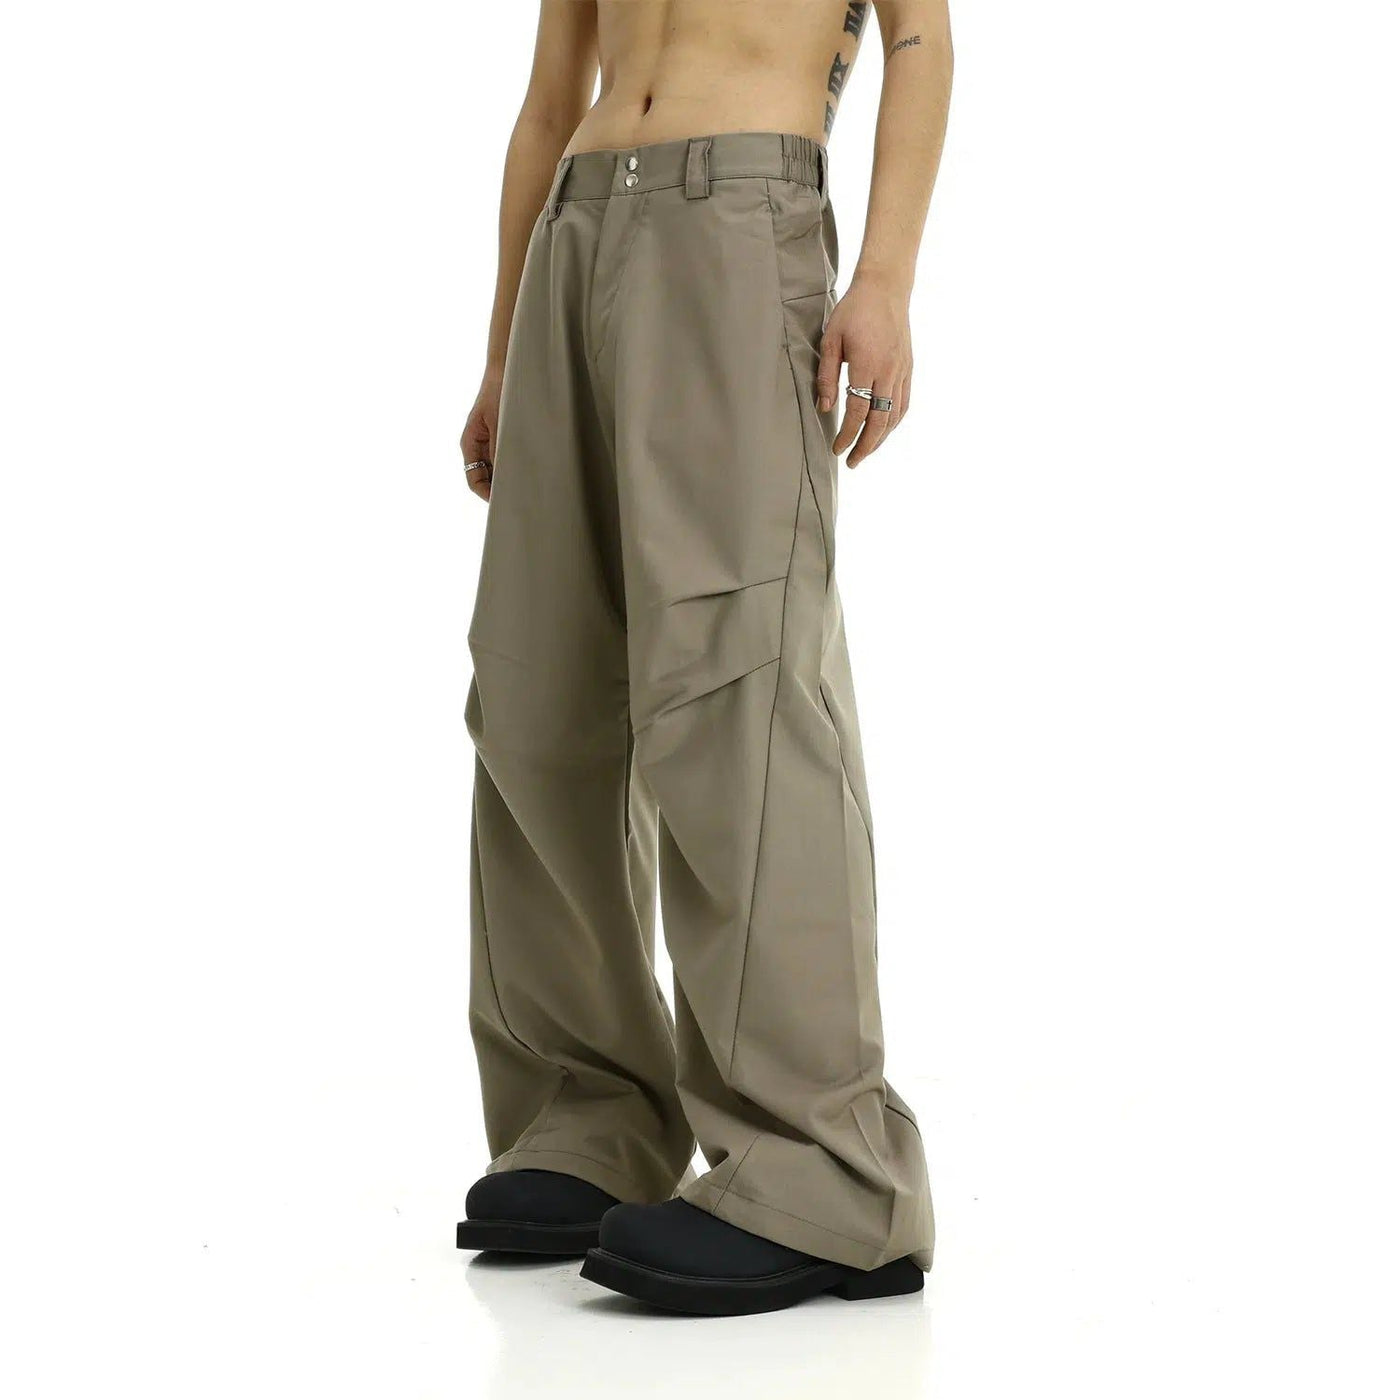 Casual Drapey Pleated Pants Korean Street Fashion Pants By MEBXX Shop Online at OH Vault